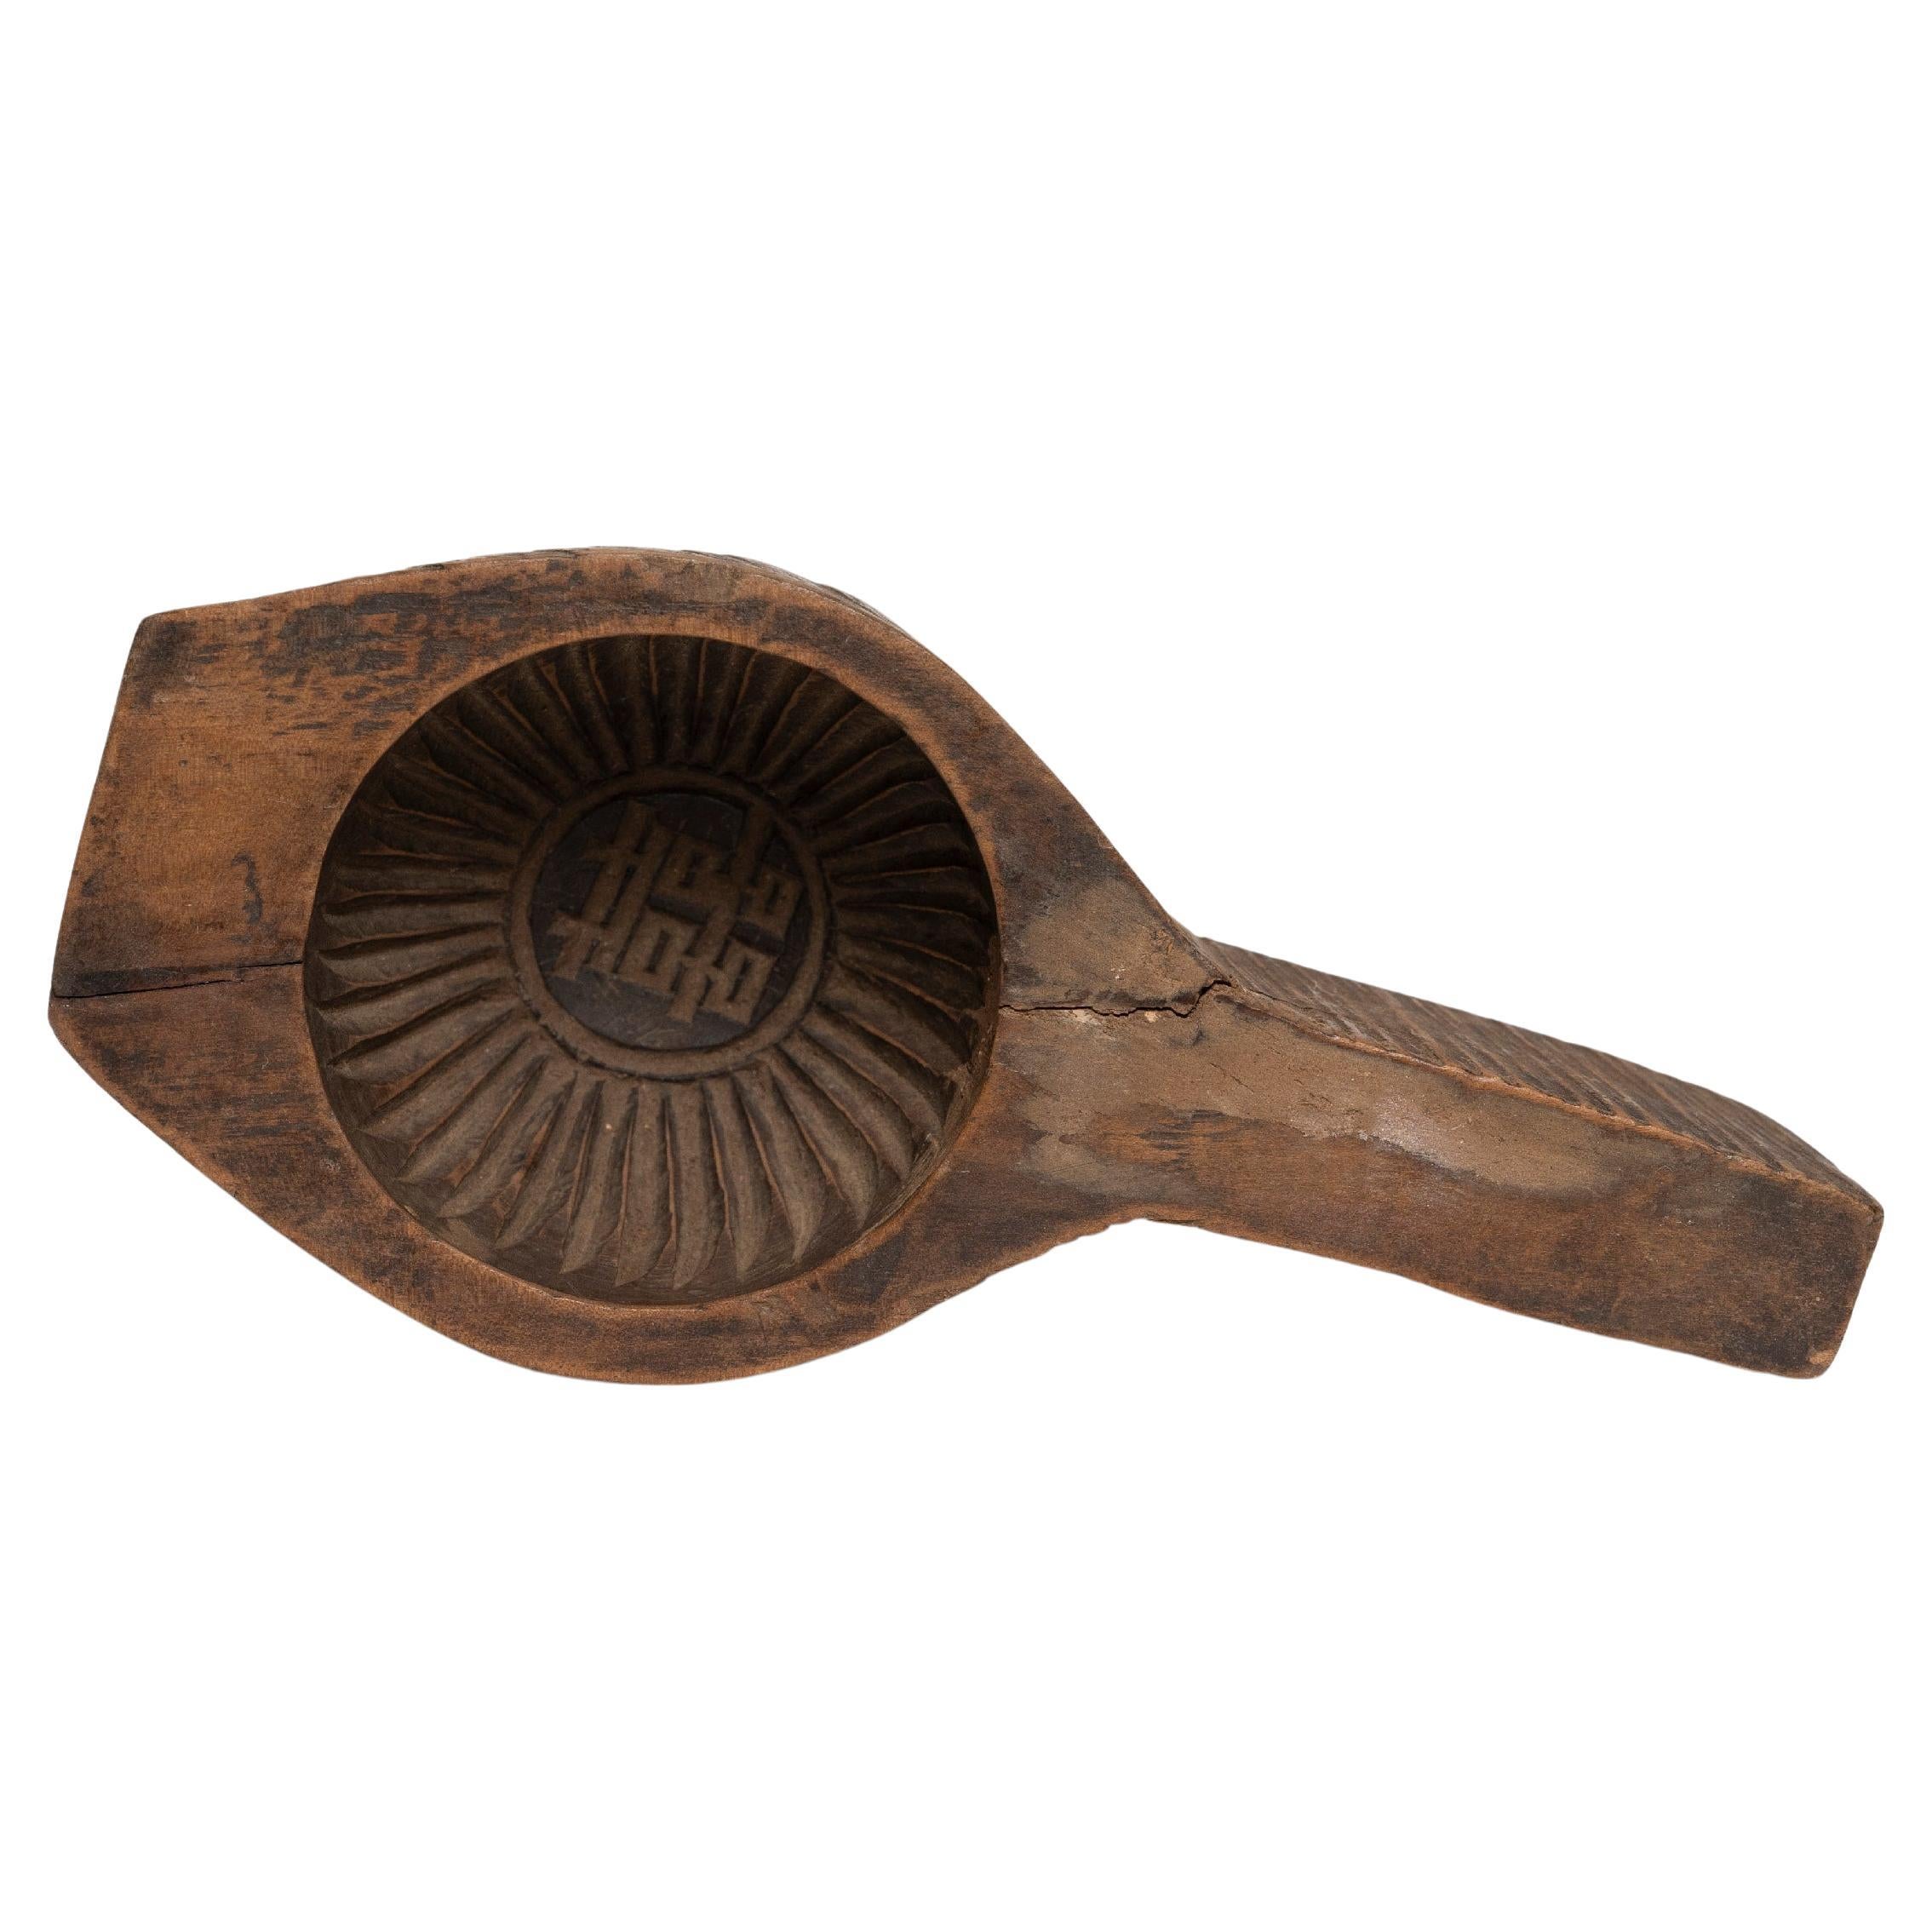 Handheld Chinese Mooncake Mold, c. 1900 For Sale